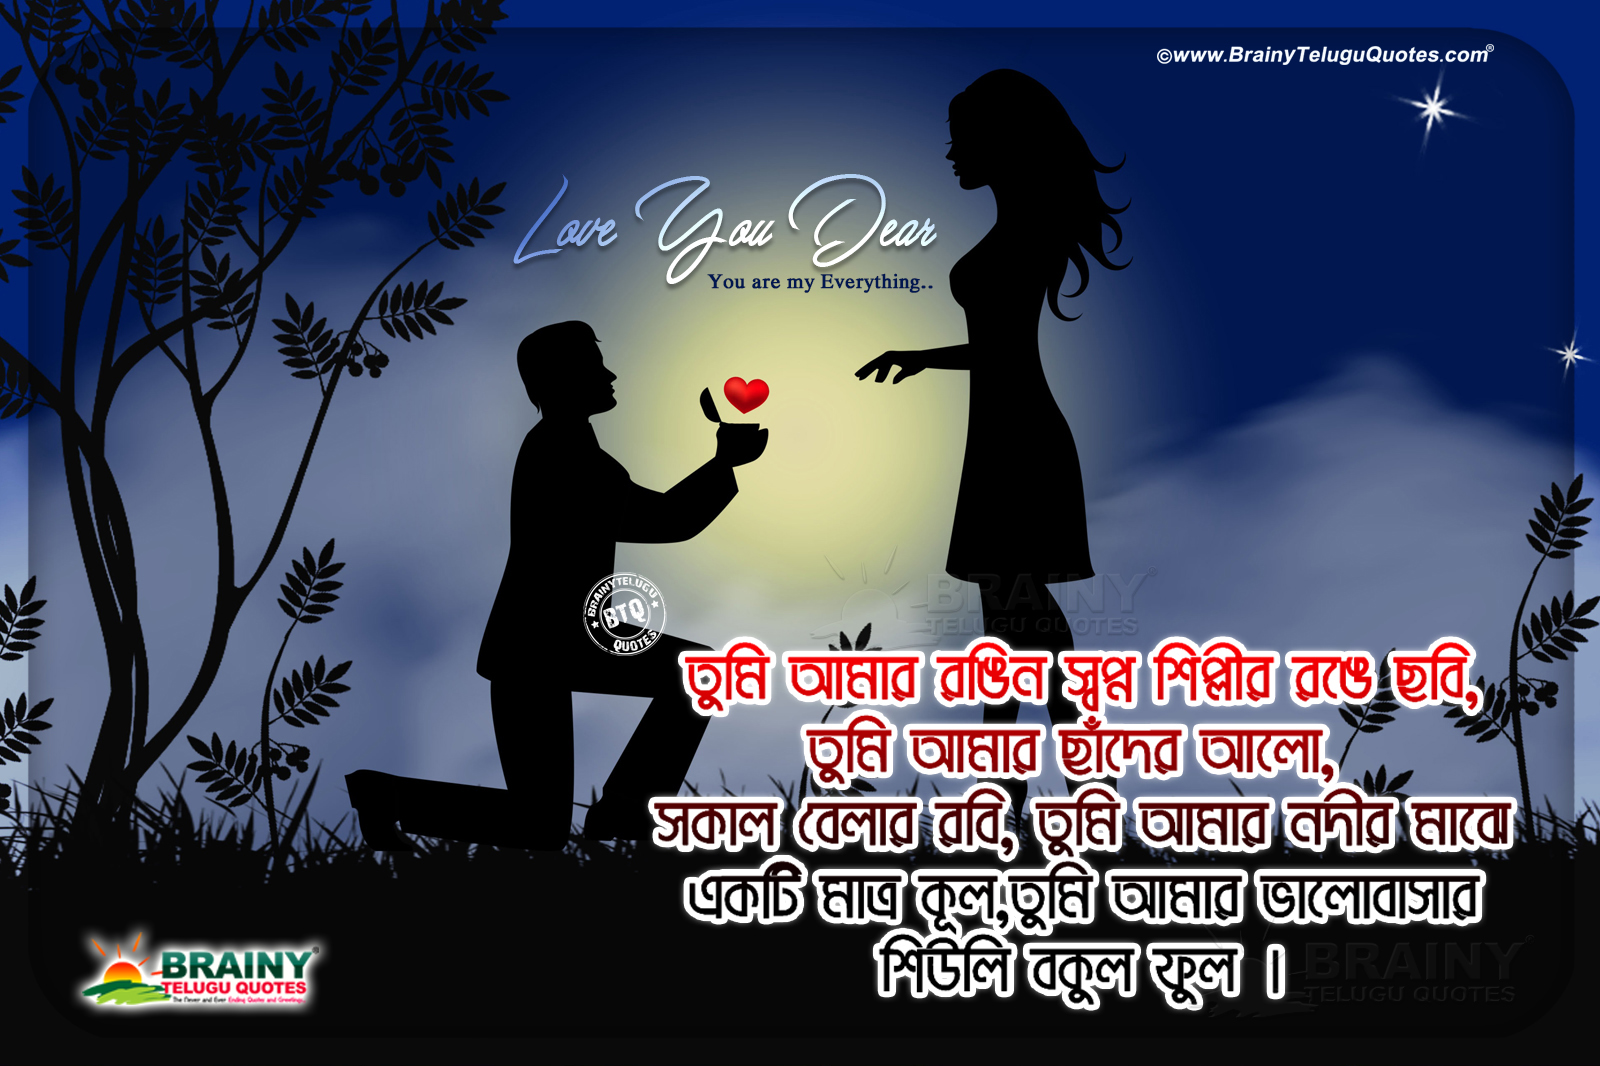 have a sweet dream meaning in bengali